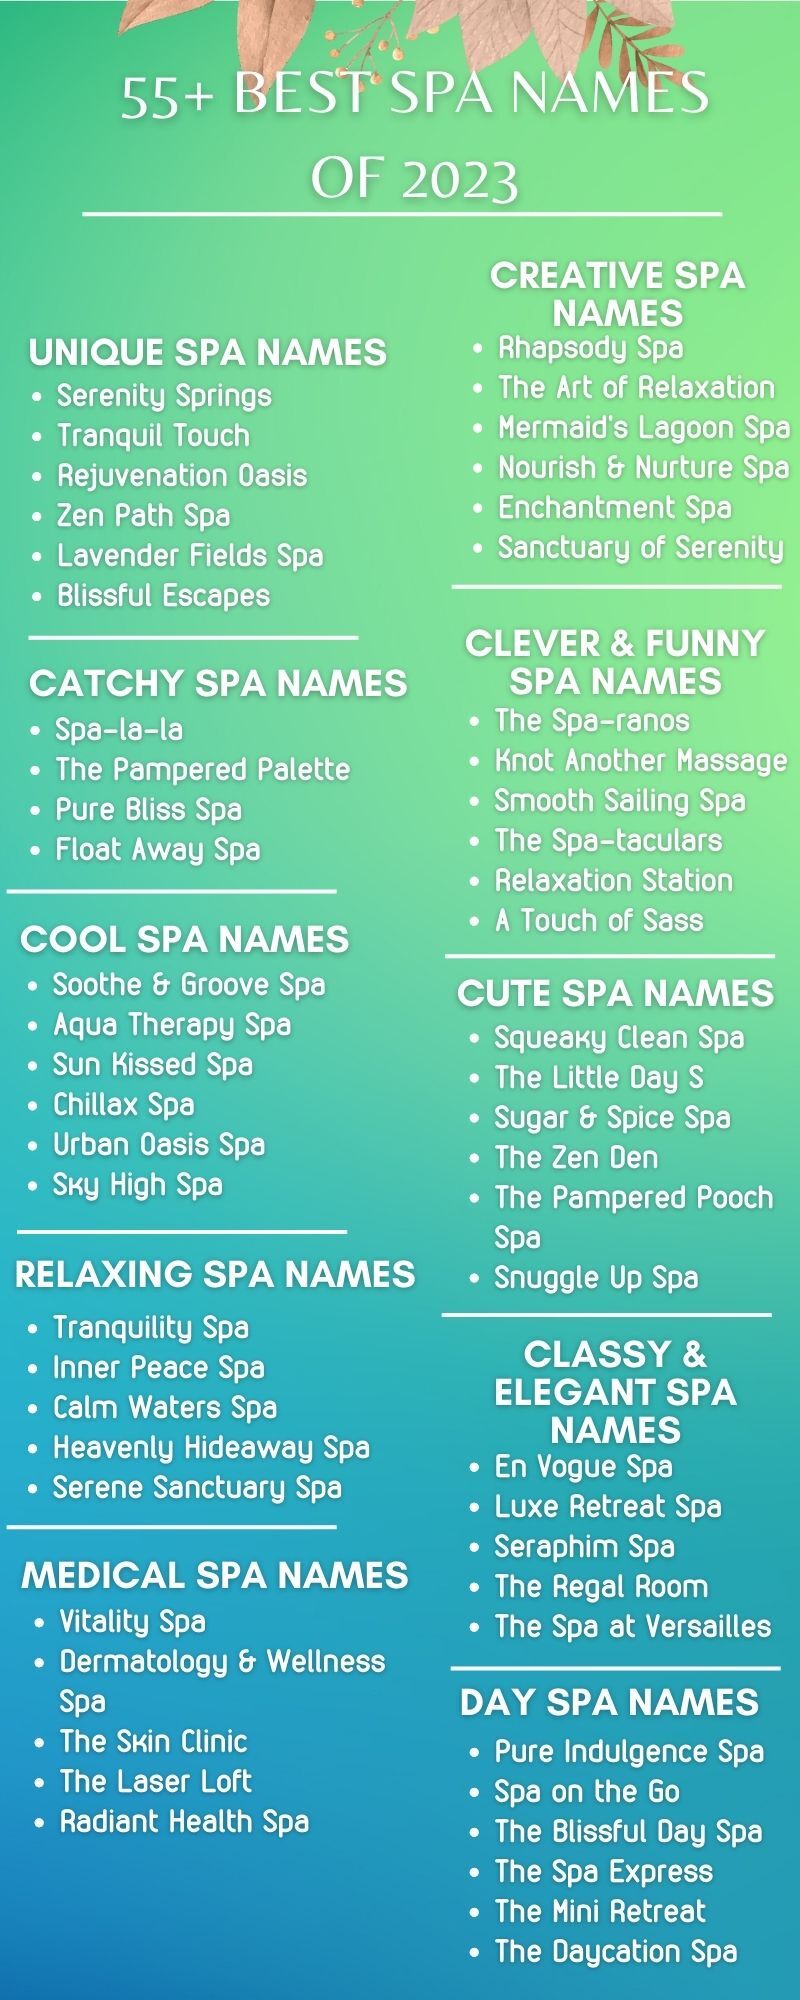 400+ Classy Nail Salon Names for Your Business | Nail salon names, Hair salon  names, Salon names